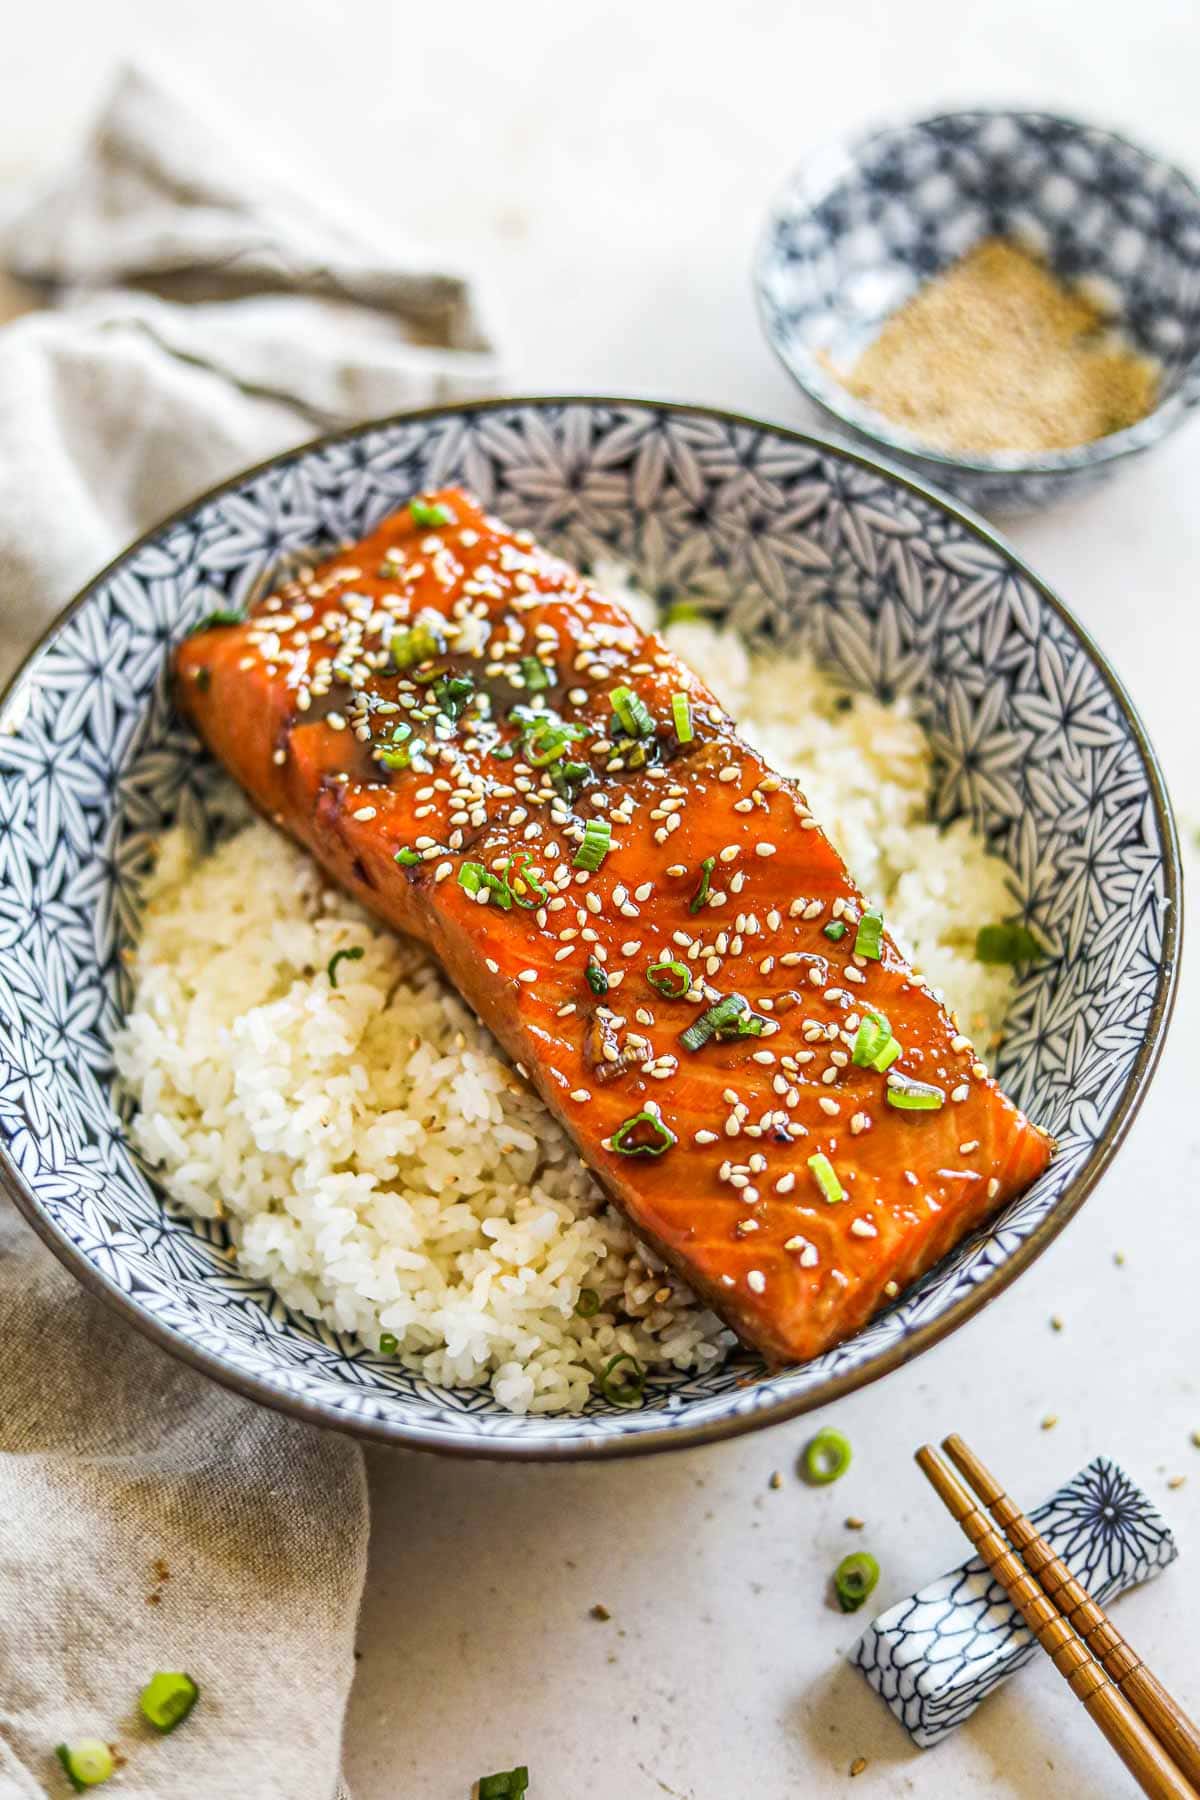 Teriyaki salmon rice bowl (donburi) in a blue Japanese porcelain bowl with chopsticks, garnished with sesame seeds and green onions.